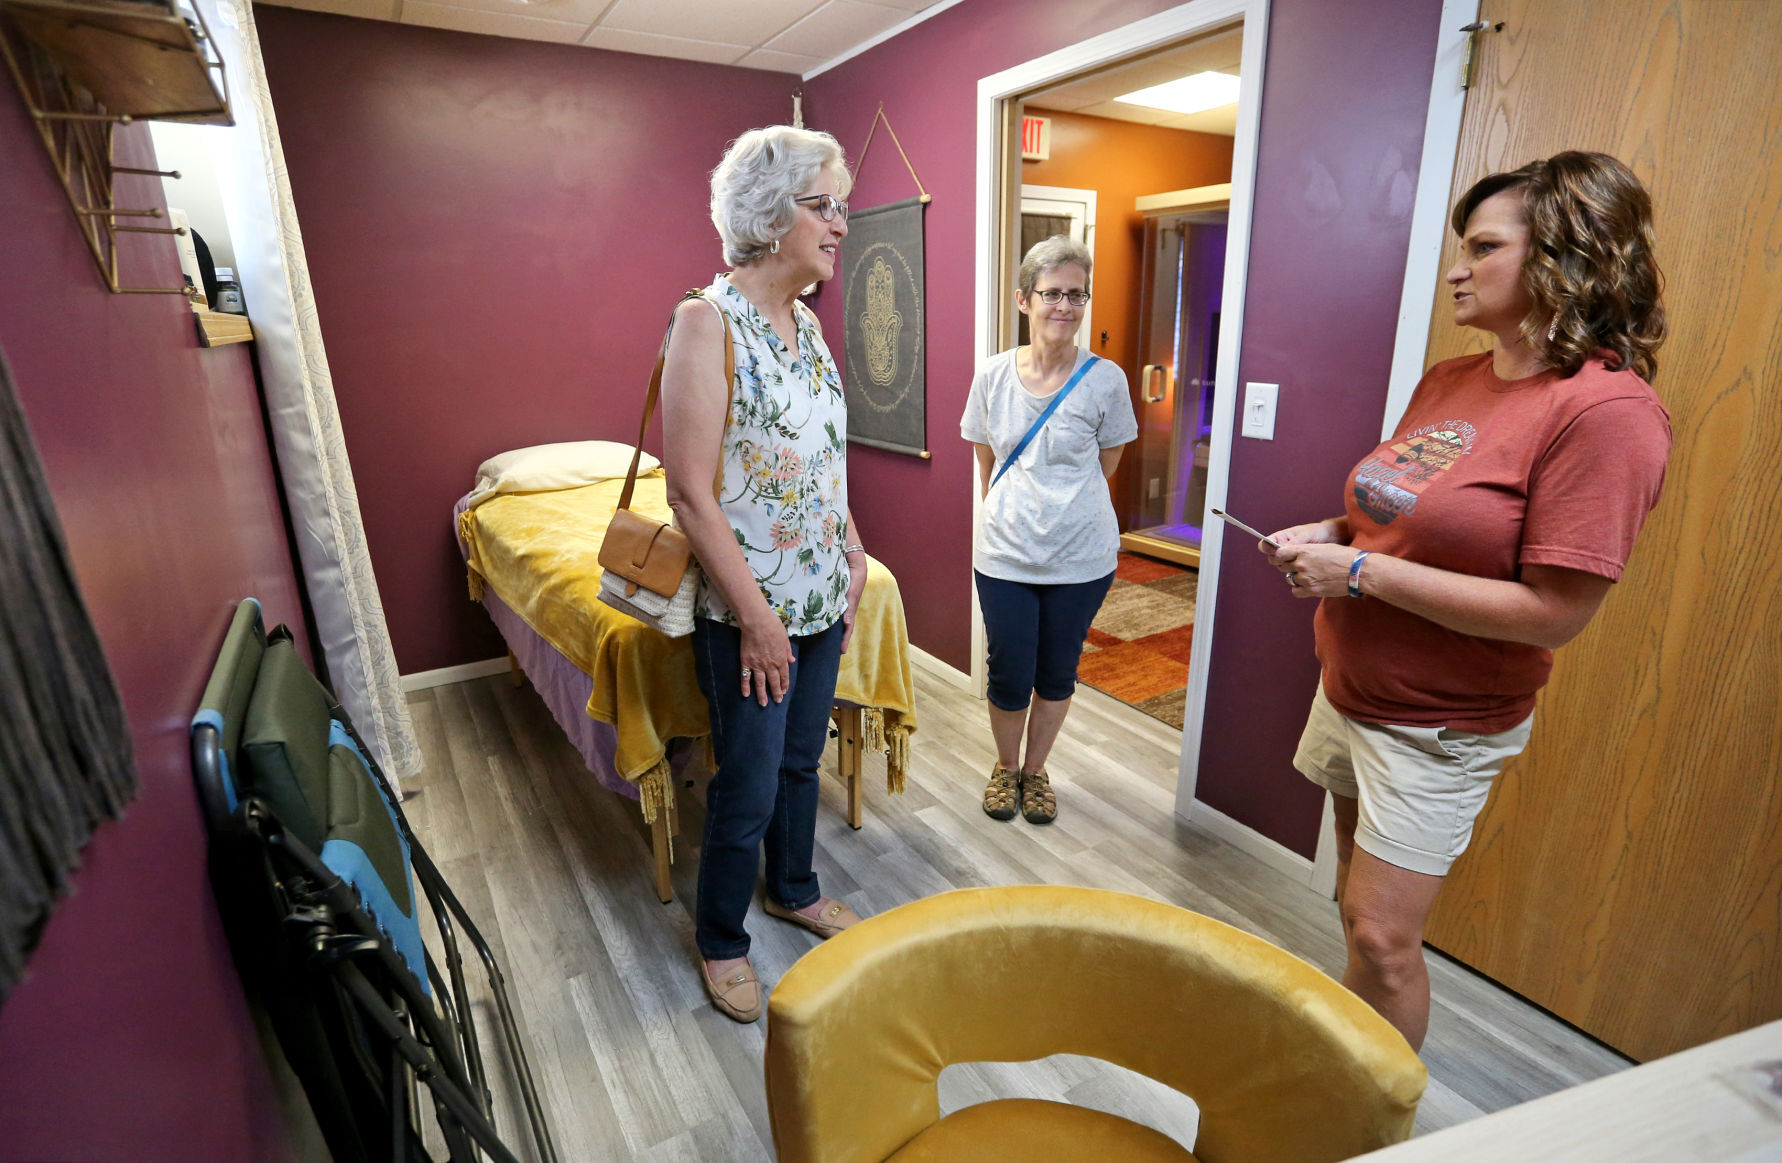 Amy Hendricks (far right) talks with Susan Anderson (far left), of Scales Mound, Ill., and Mary Meyer, of Galena, Ill., during an open house at In Harmony in Hazel Green, Wis., on Saturday, Aug. 14, 2021.    PHOTO CREDIT: JESSICA REILLY